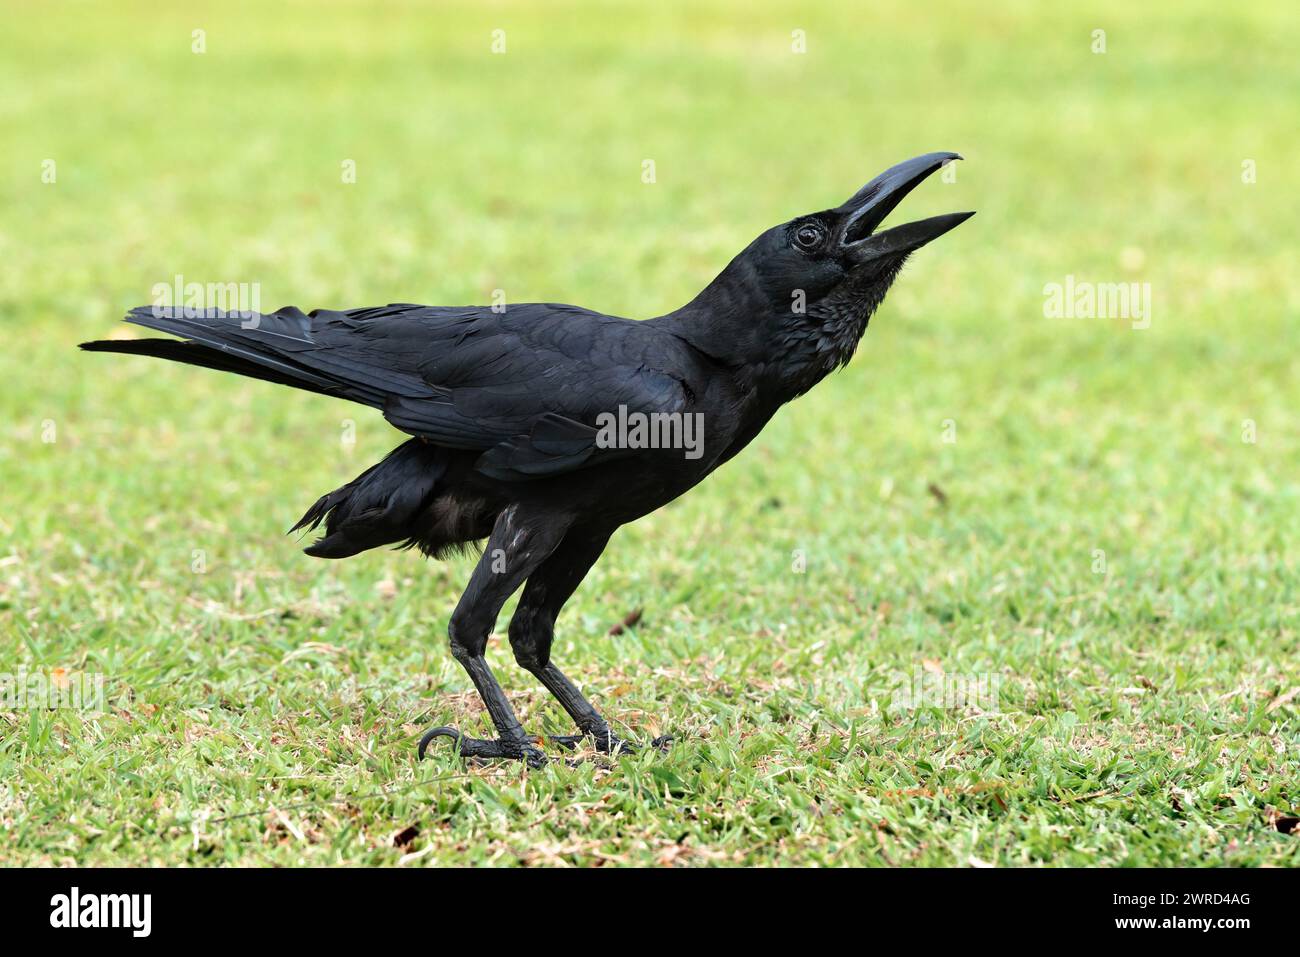 Portrait image of single large raven caws in the park outdoor Stock Photo